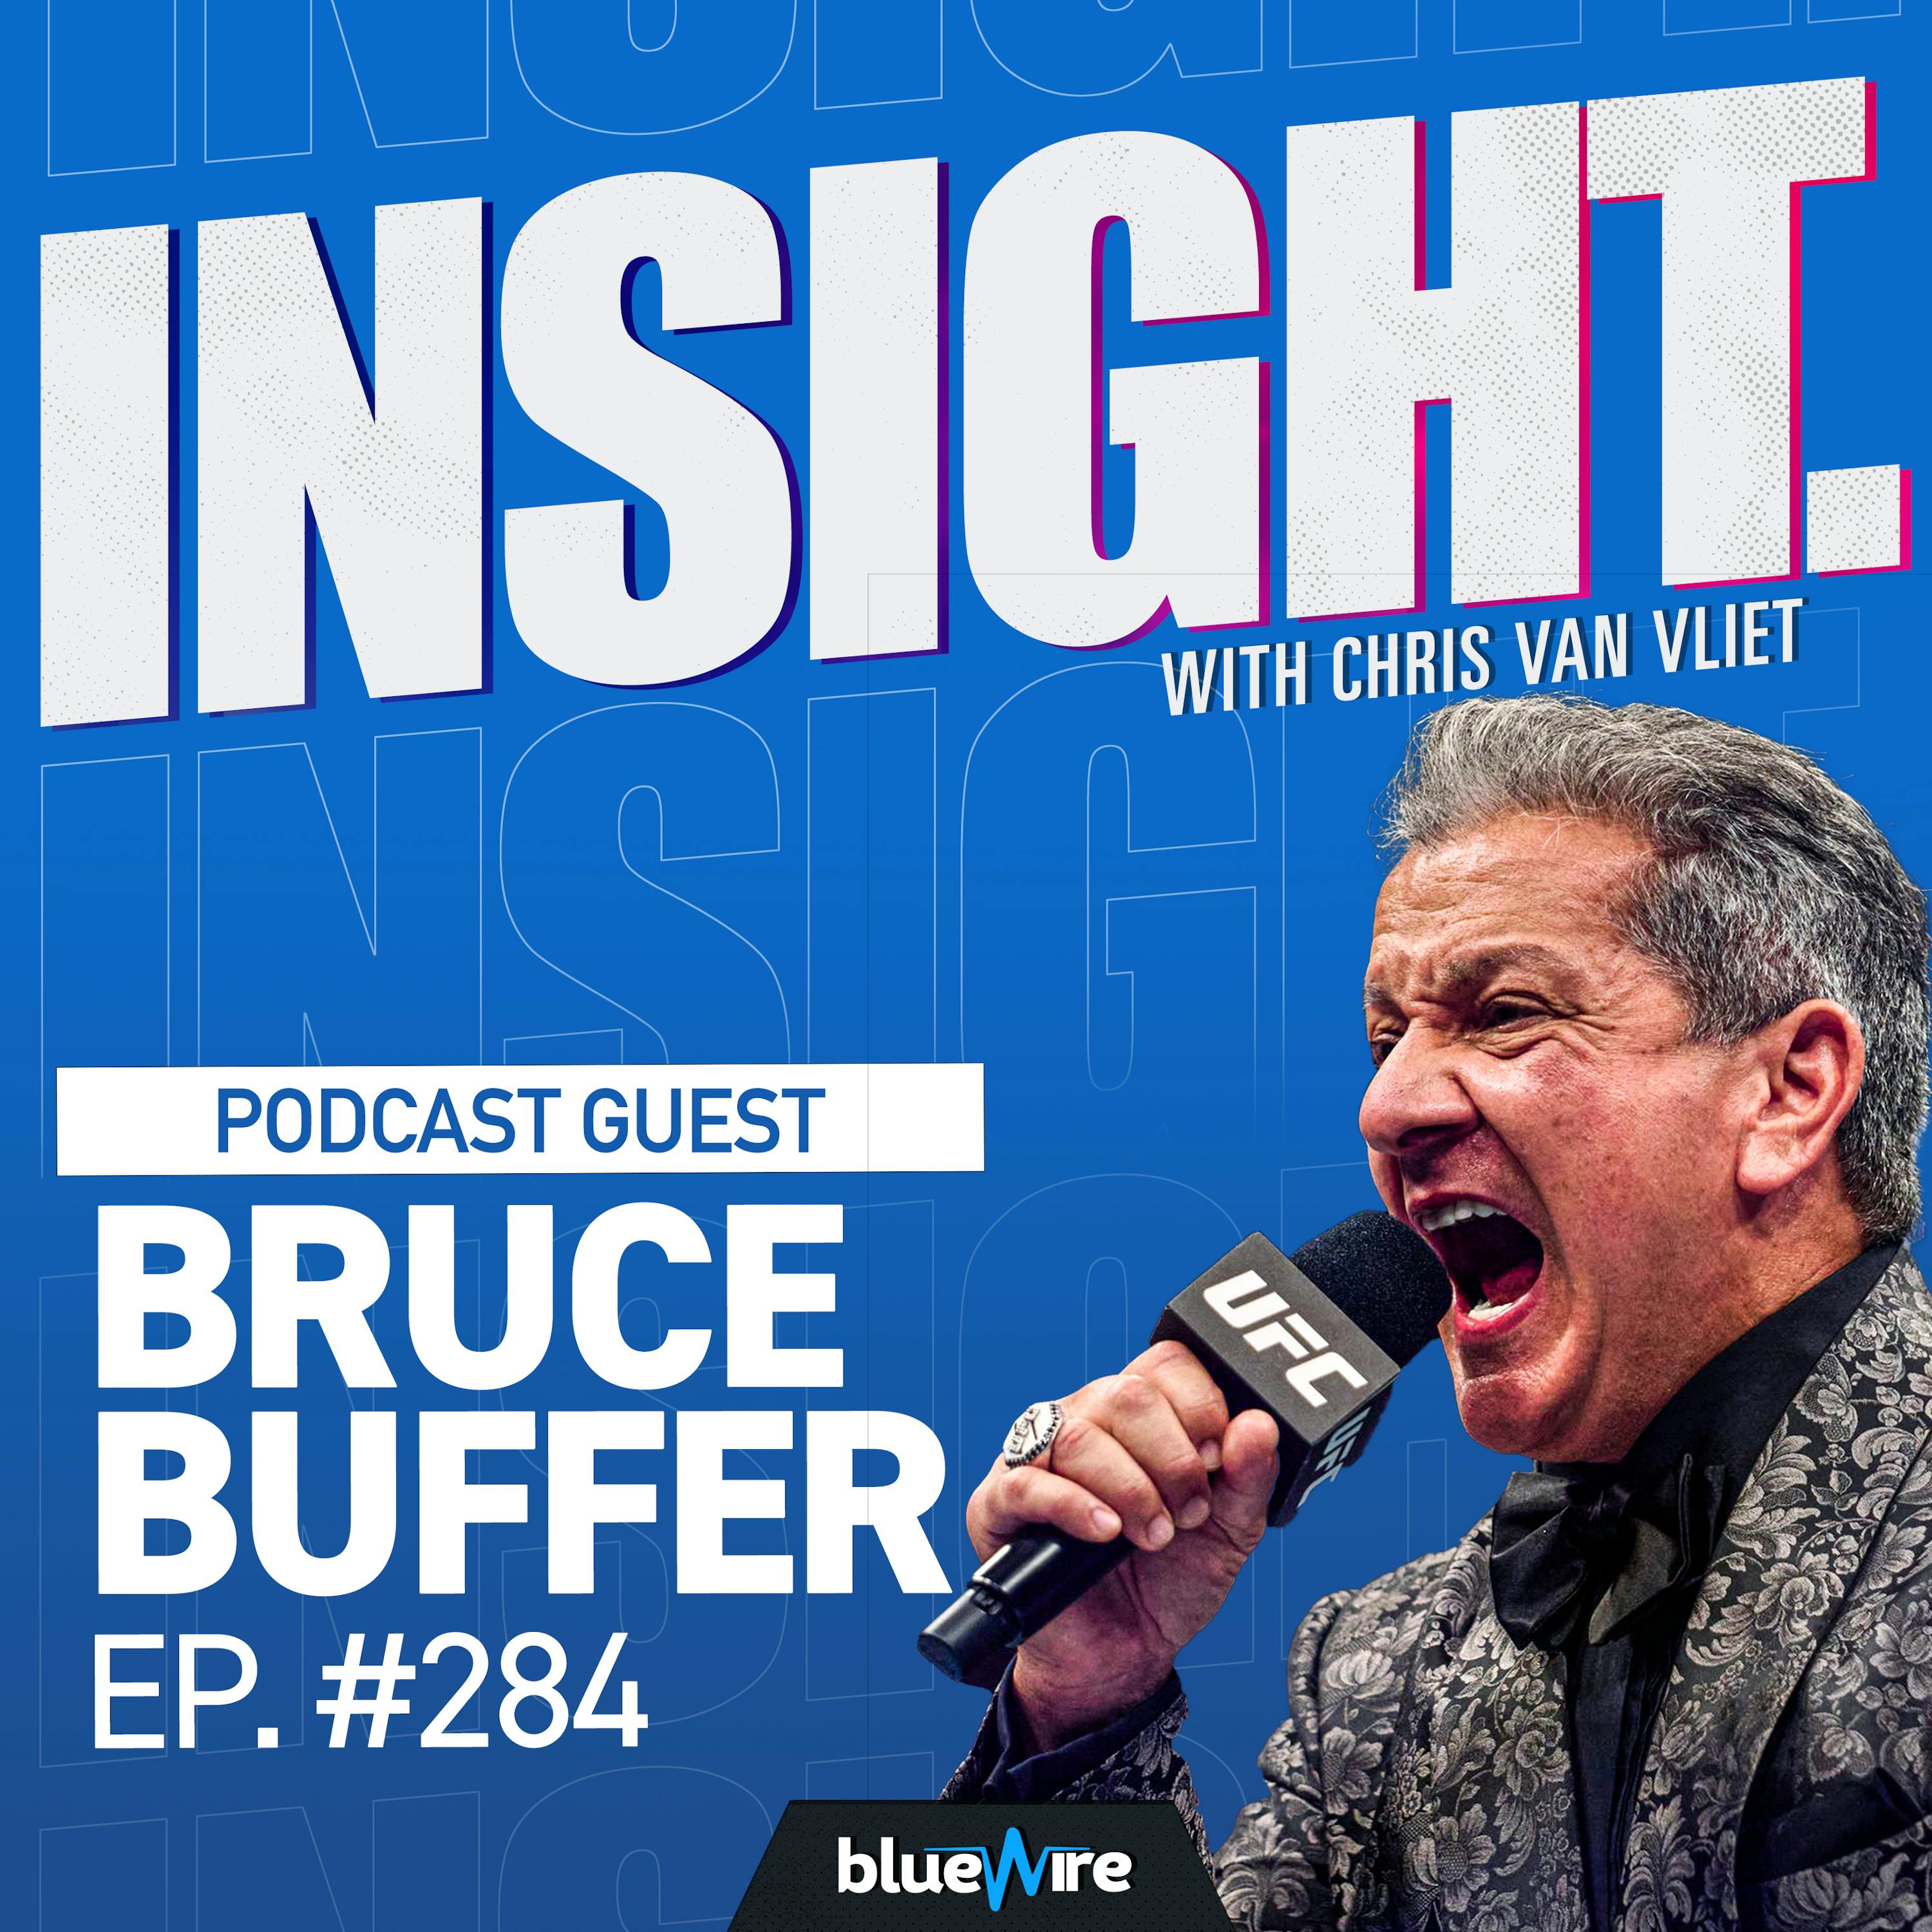 Bruce Buffer - The Man Behind The Veteran Voice Of The UFC